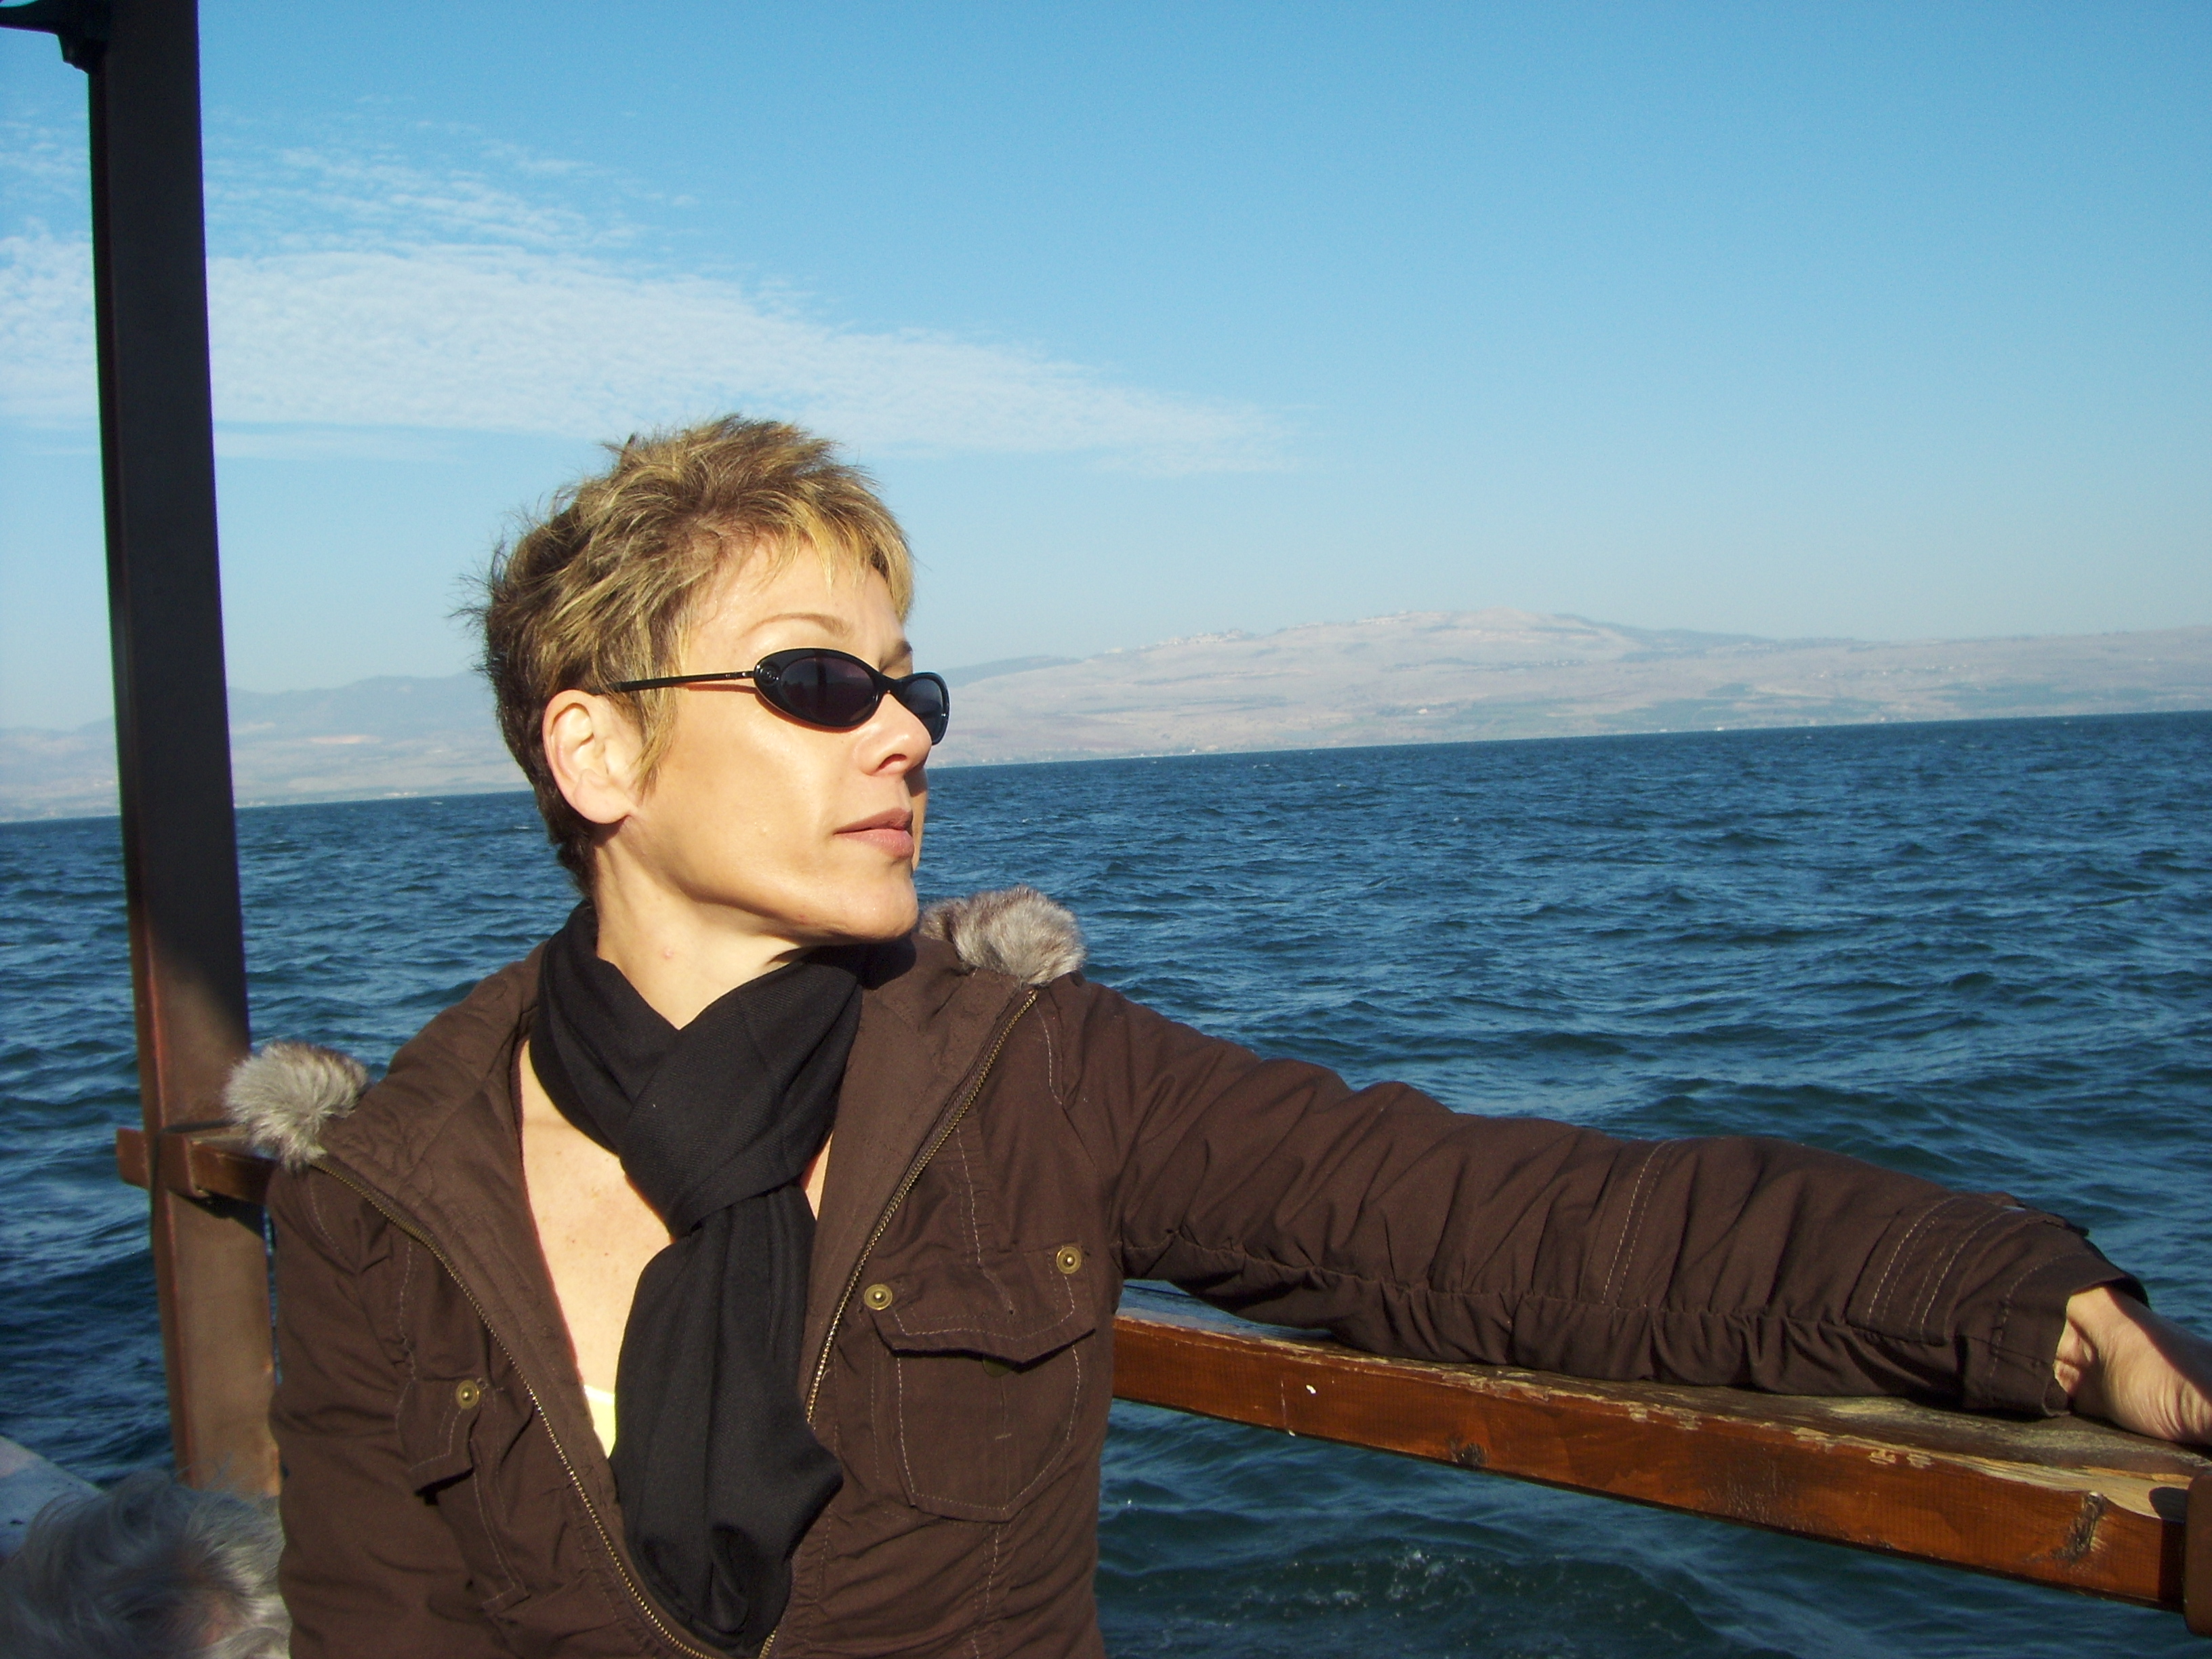 On the Sea of Galilee in Israel